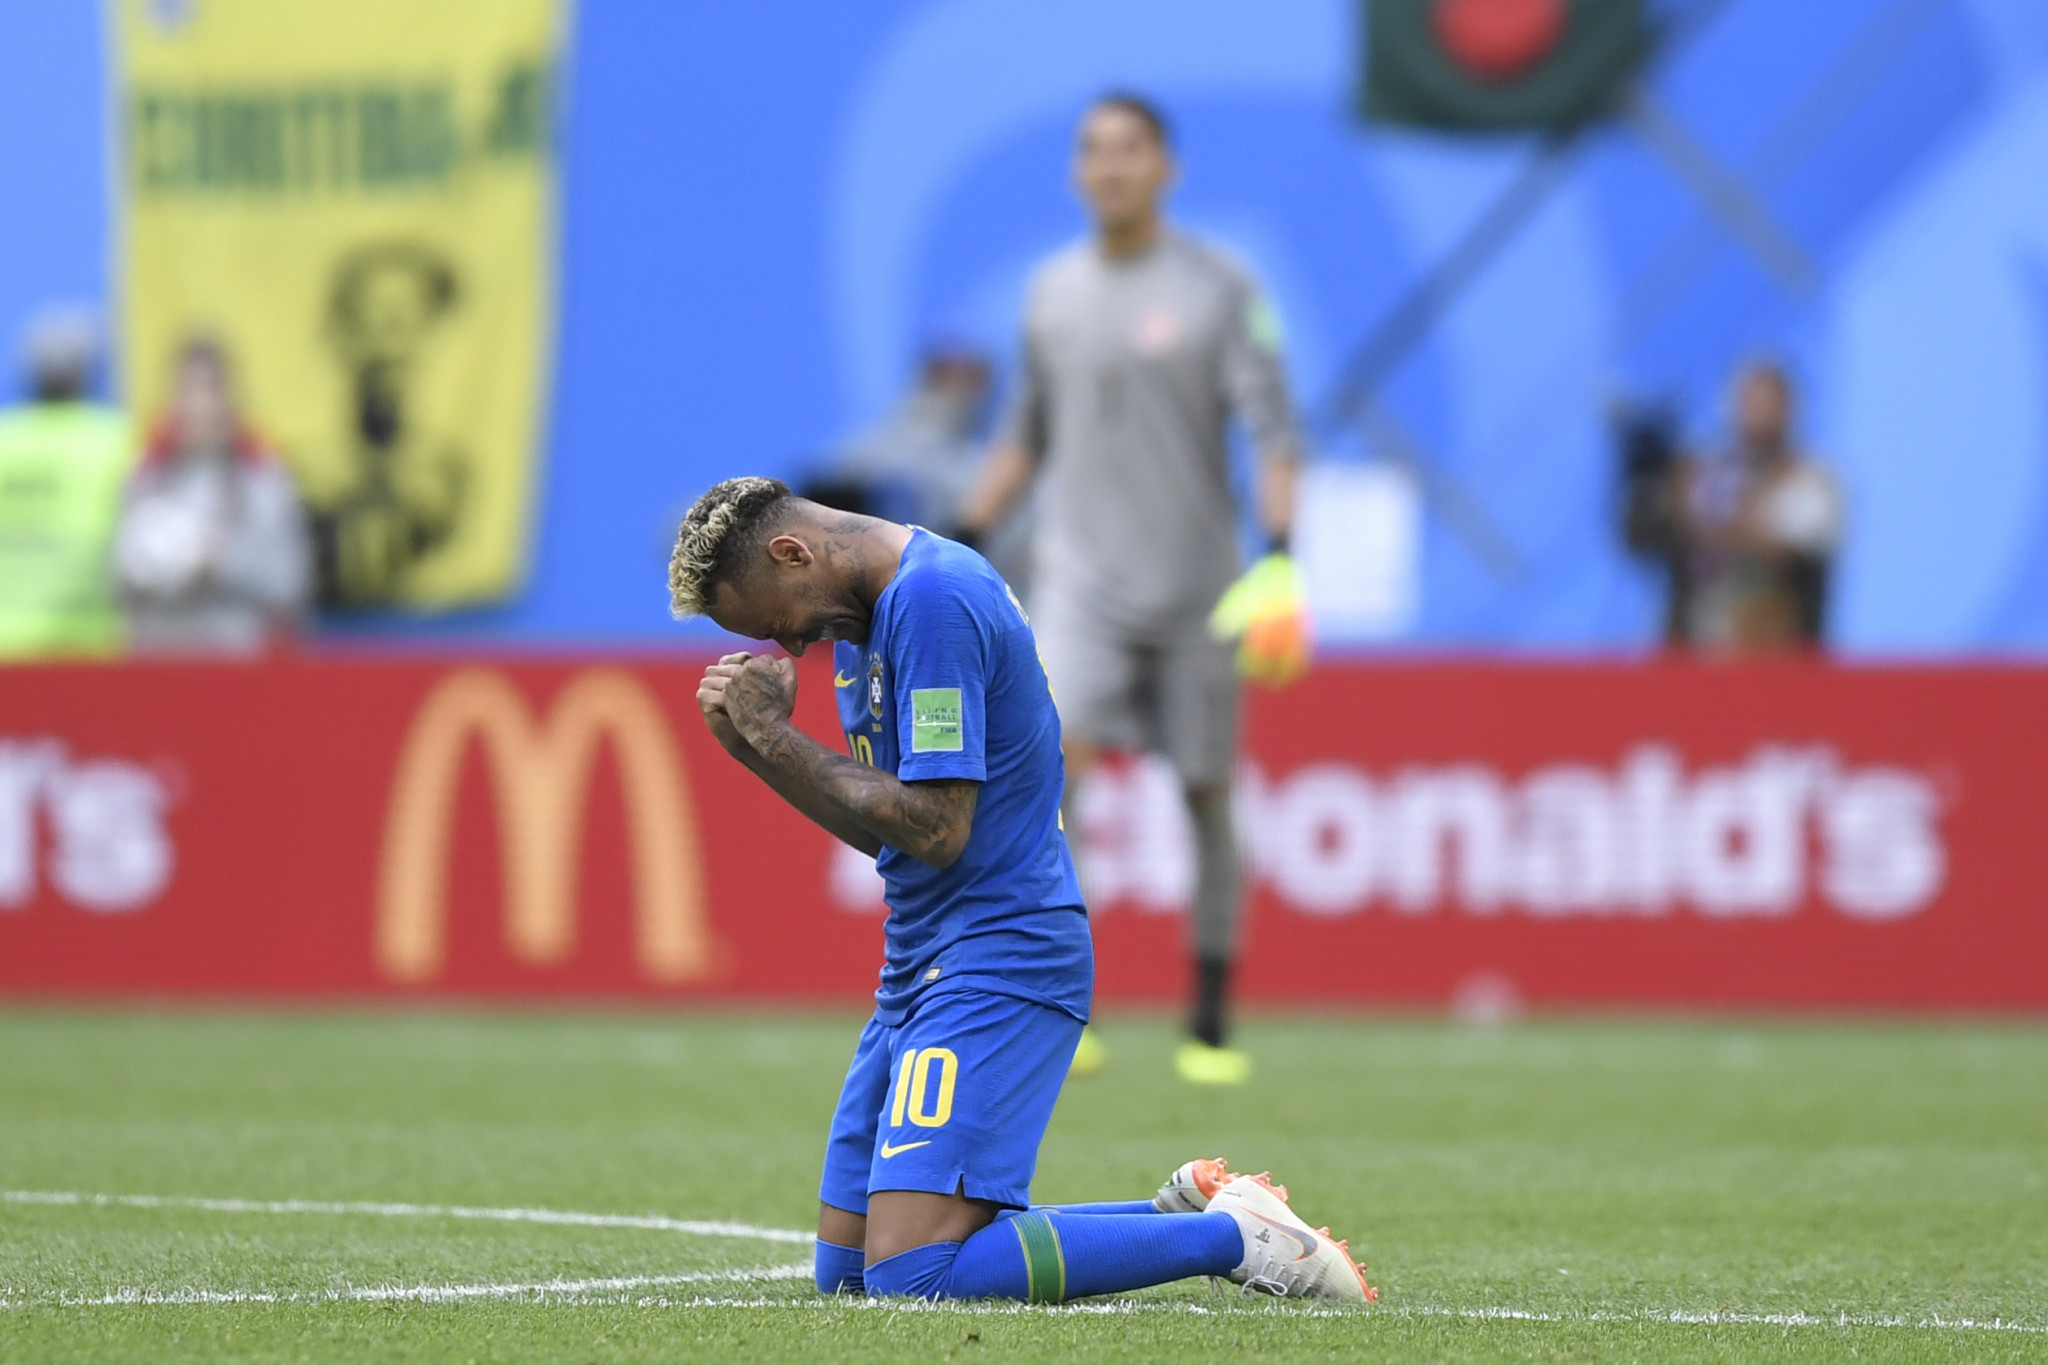 Neymar was in tears of joy after Brazil survived a scare to beat Costa Rica at the 2018 FIFA World Cup in Russia today ©Getty Images